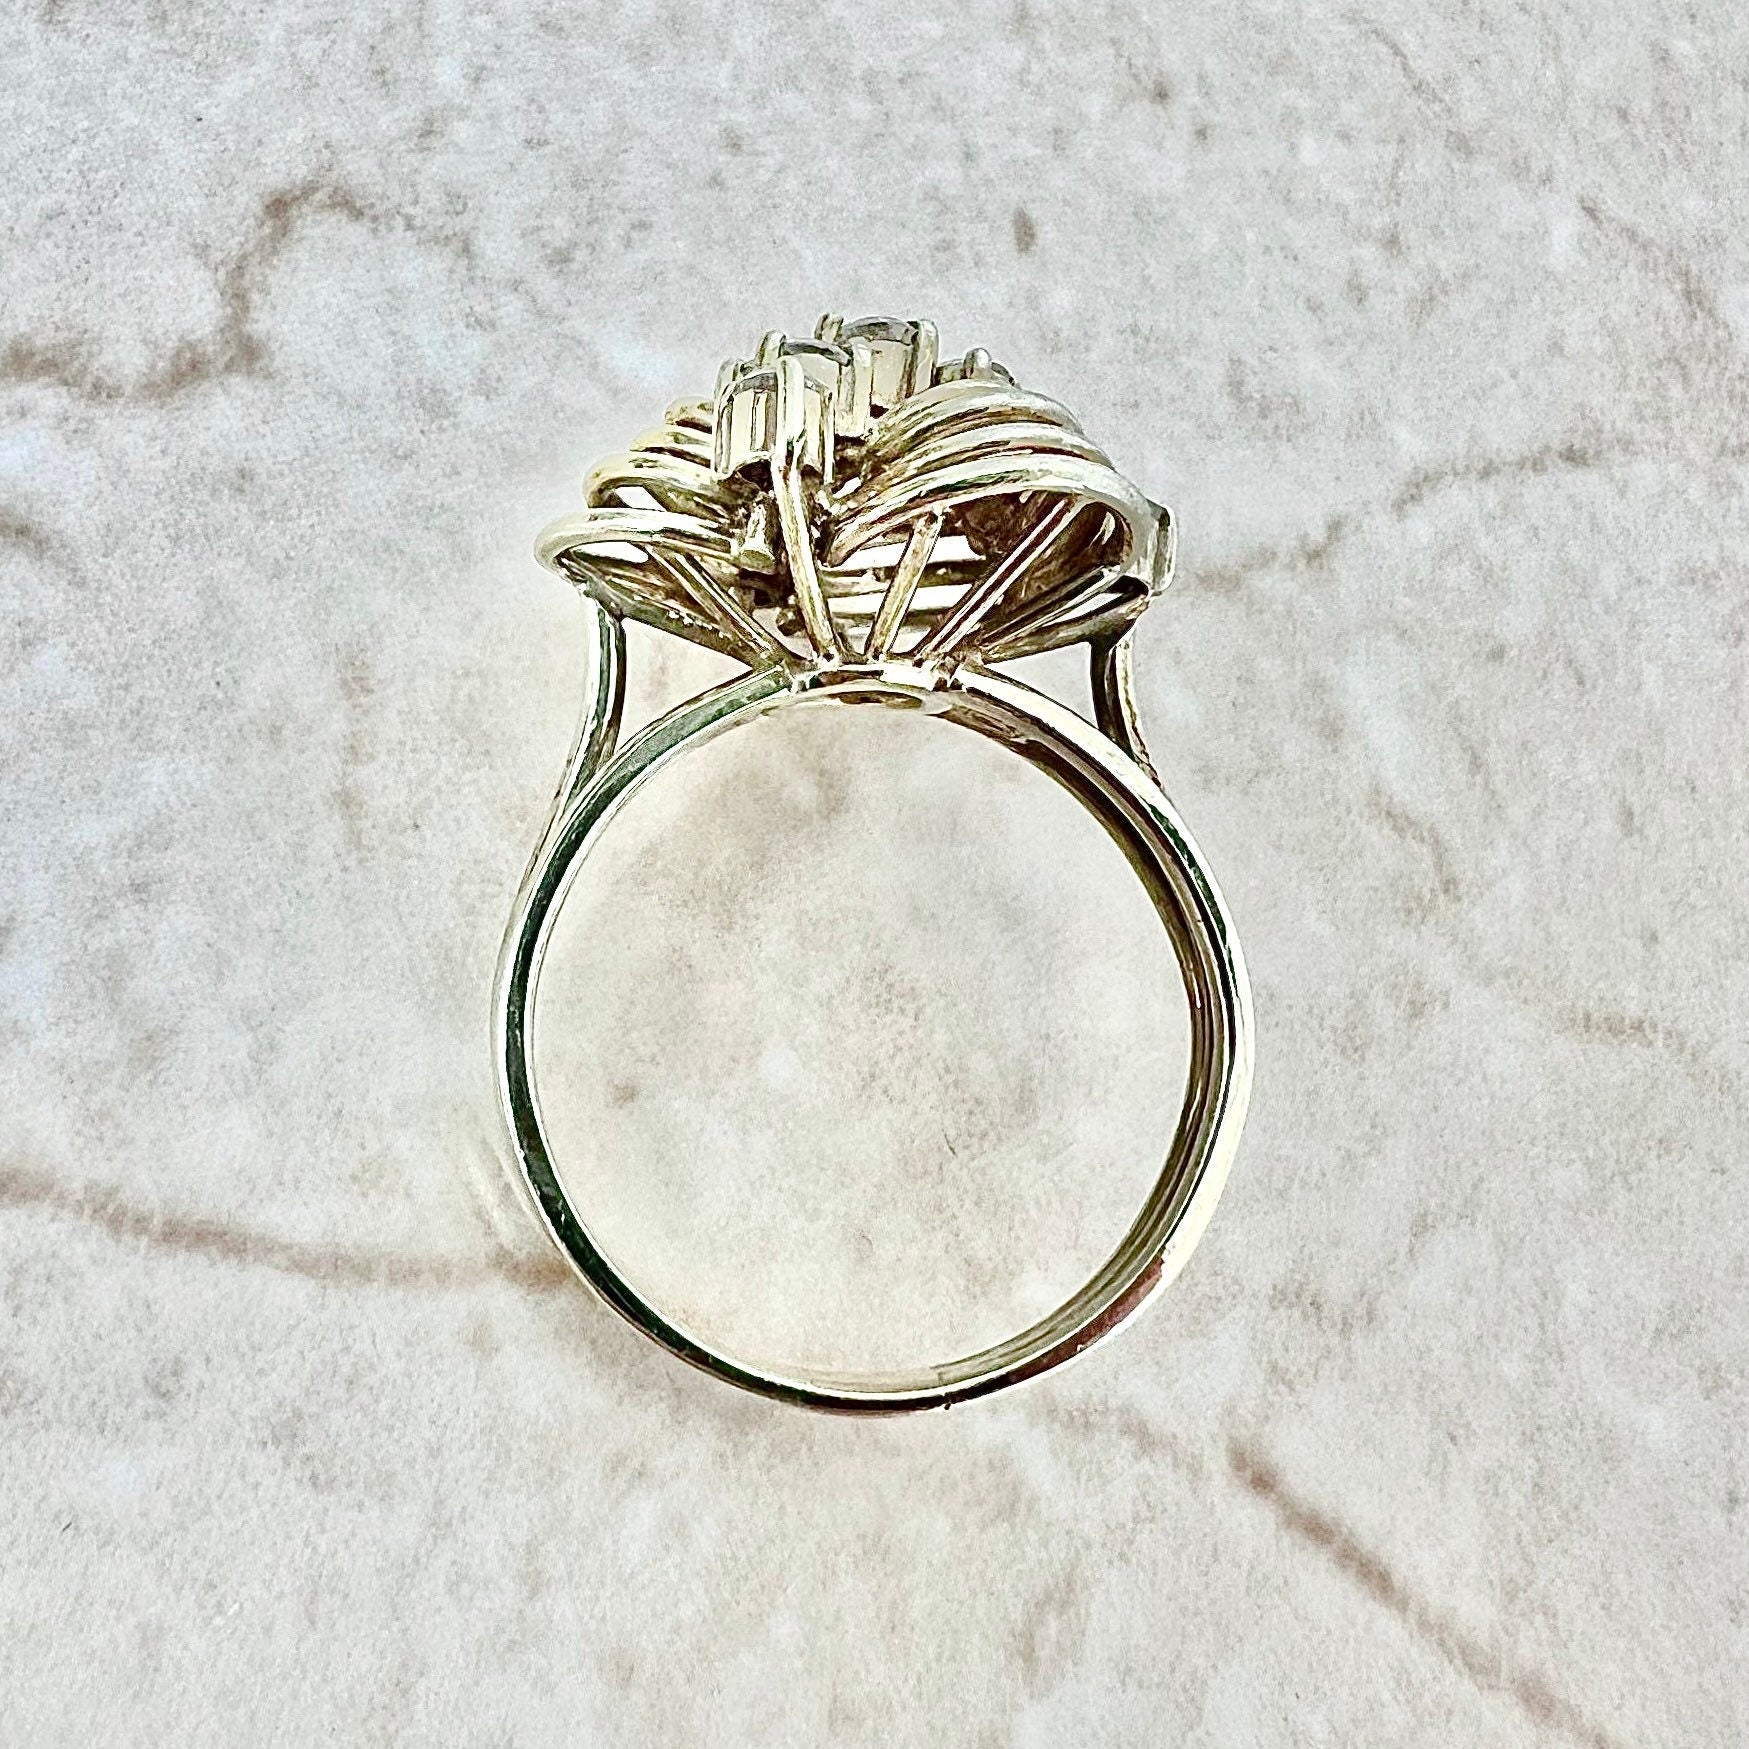 Fine Vintage 14K Diamond Ring - Yellow Gold Diamond Cocktail Ring - Statement Ring - Anniversary Ring - Birthday Gift - Best Gifts For Her